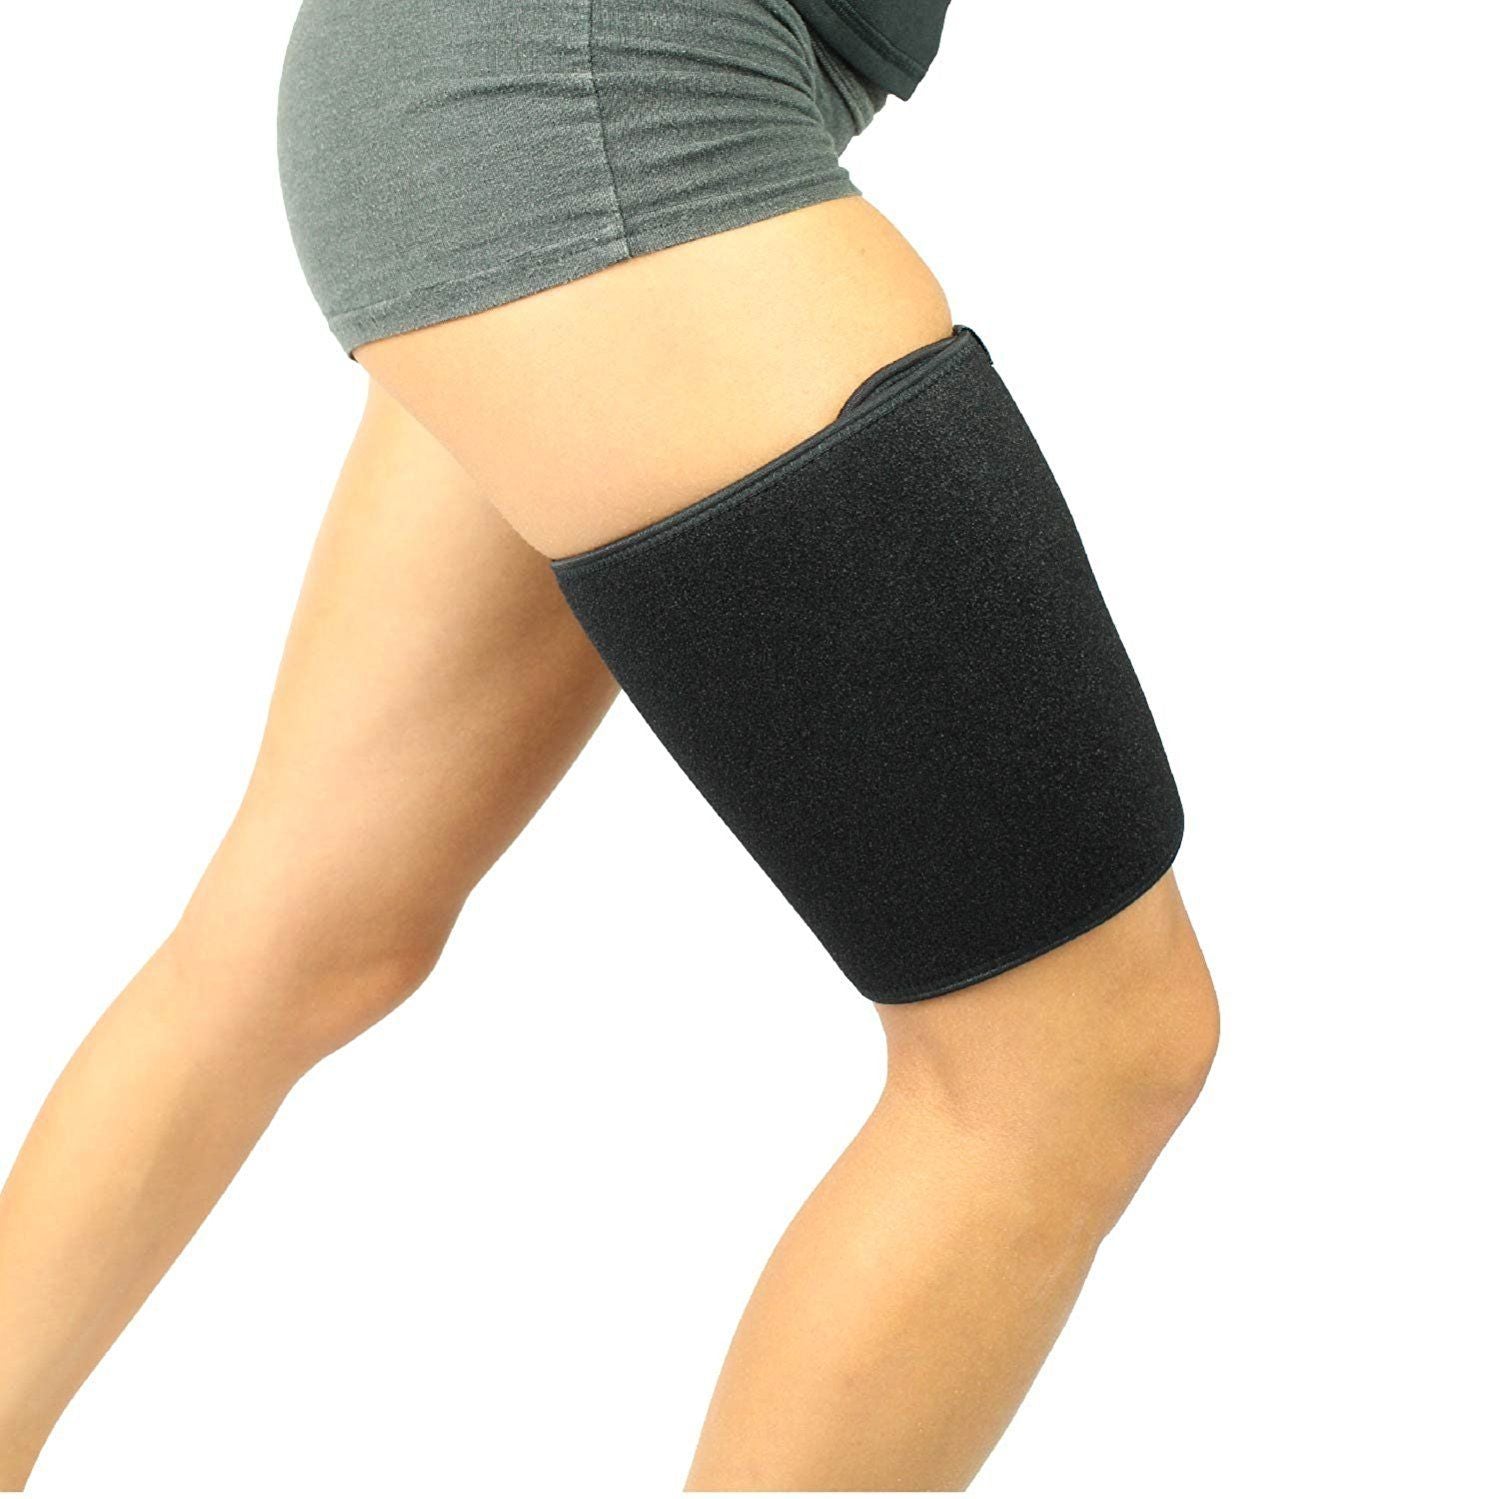 Hamstring Compression Sleeve Recovery Support Non-Slip Groin Wrap